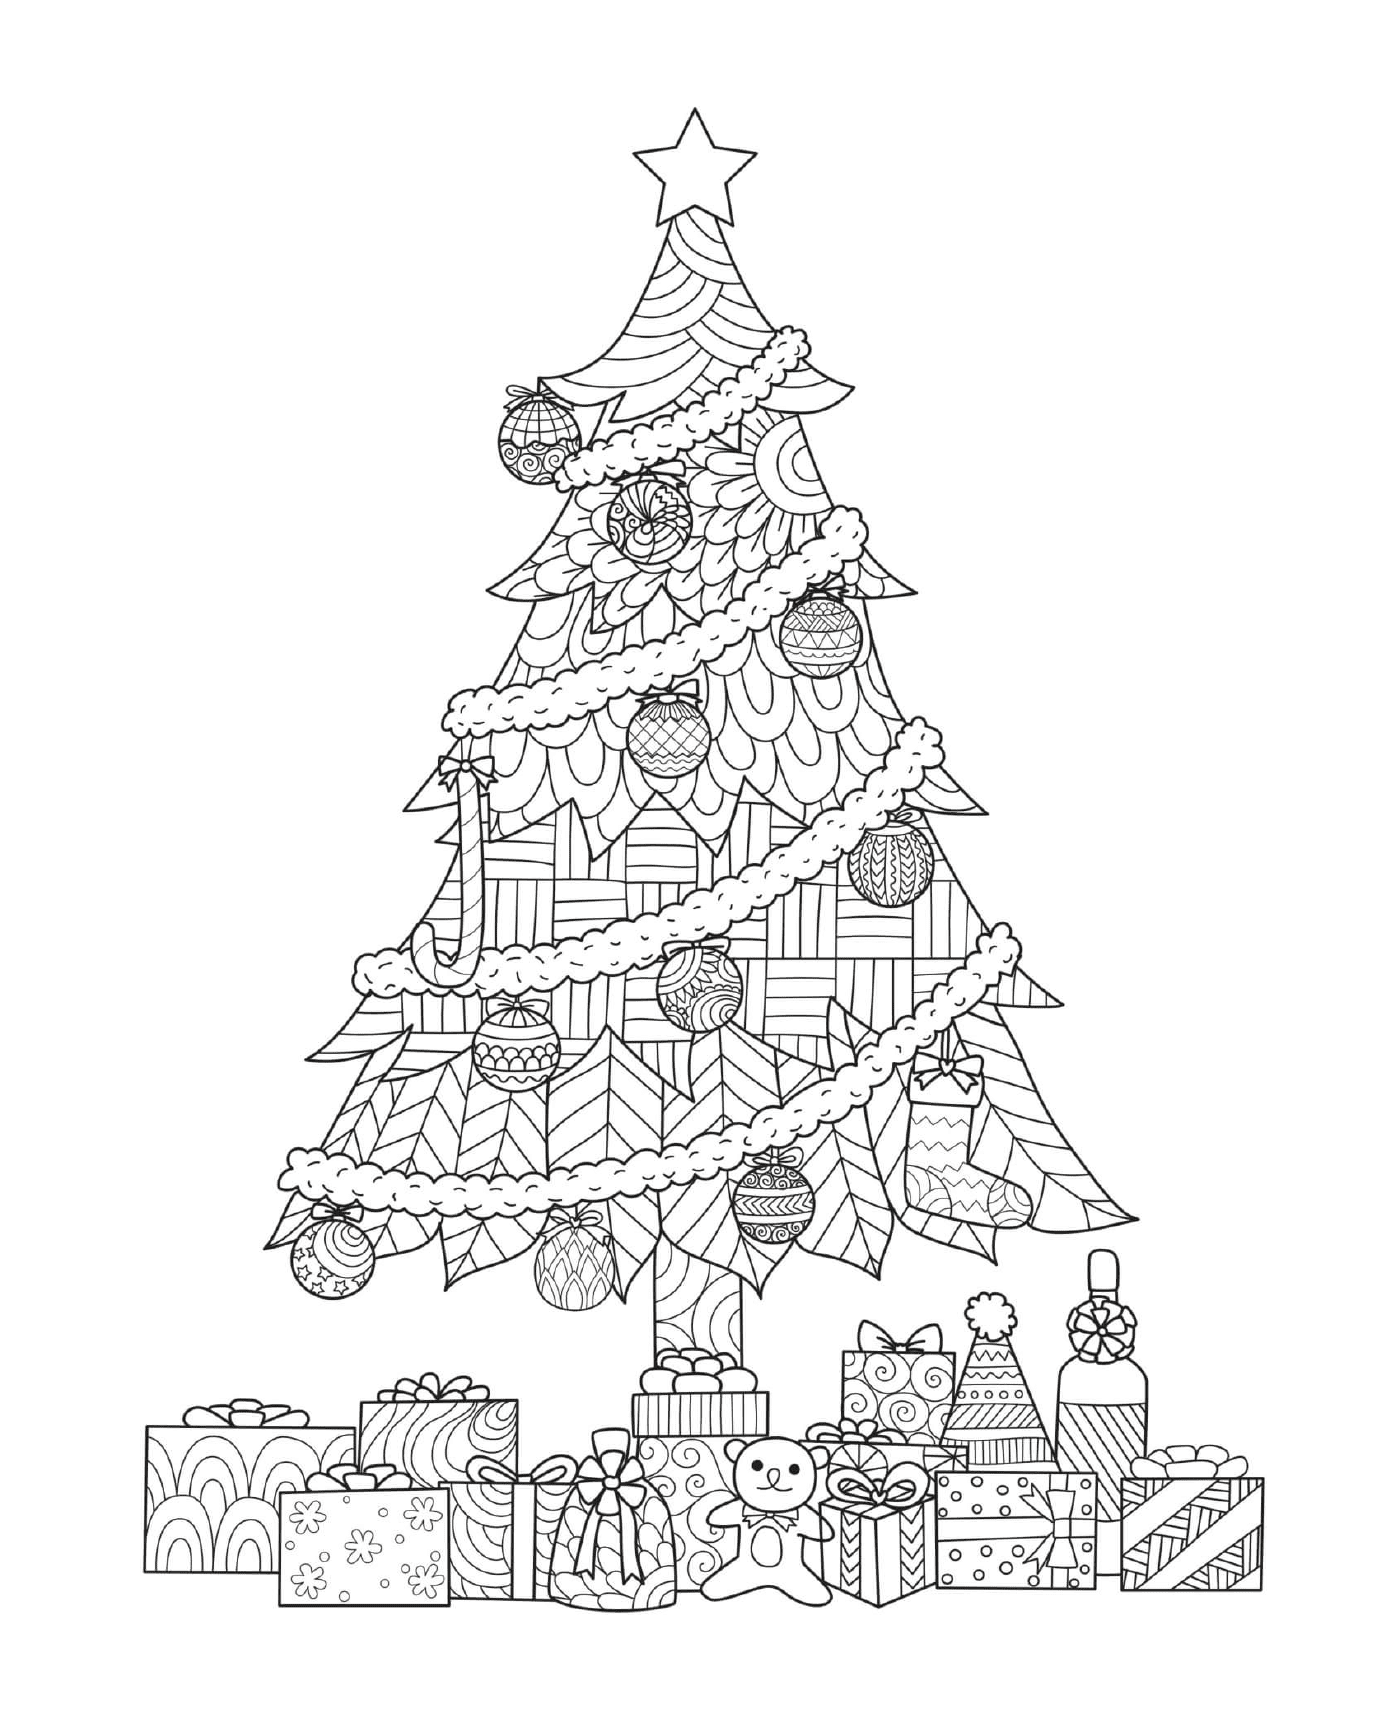  A Christmas tree with gifts under it 